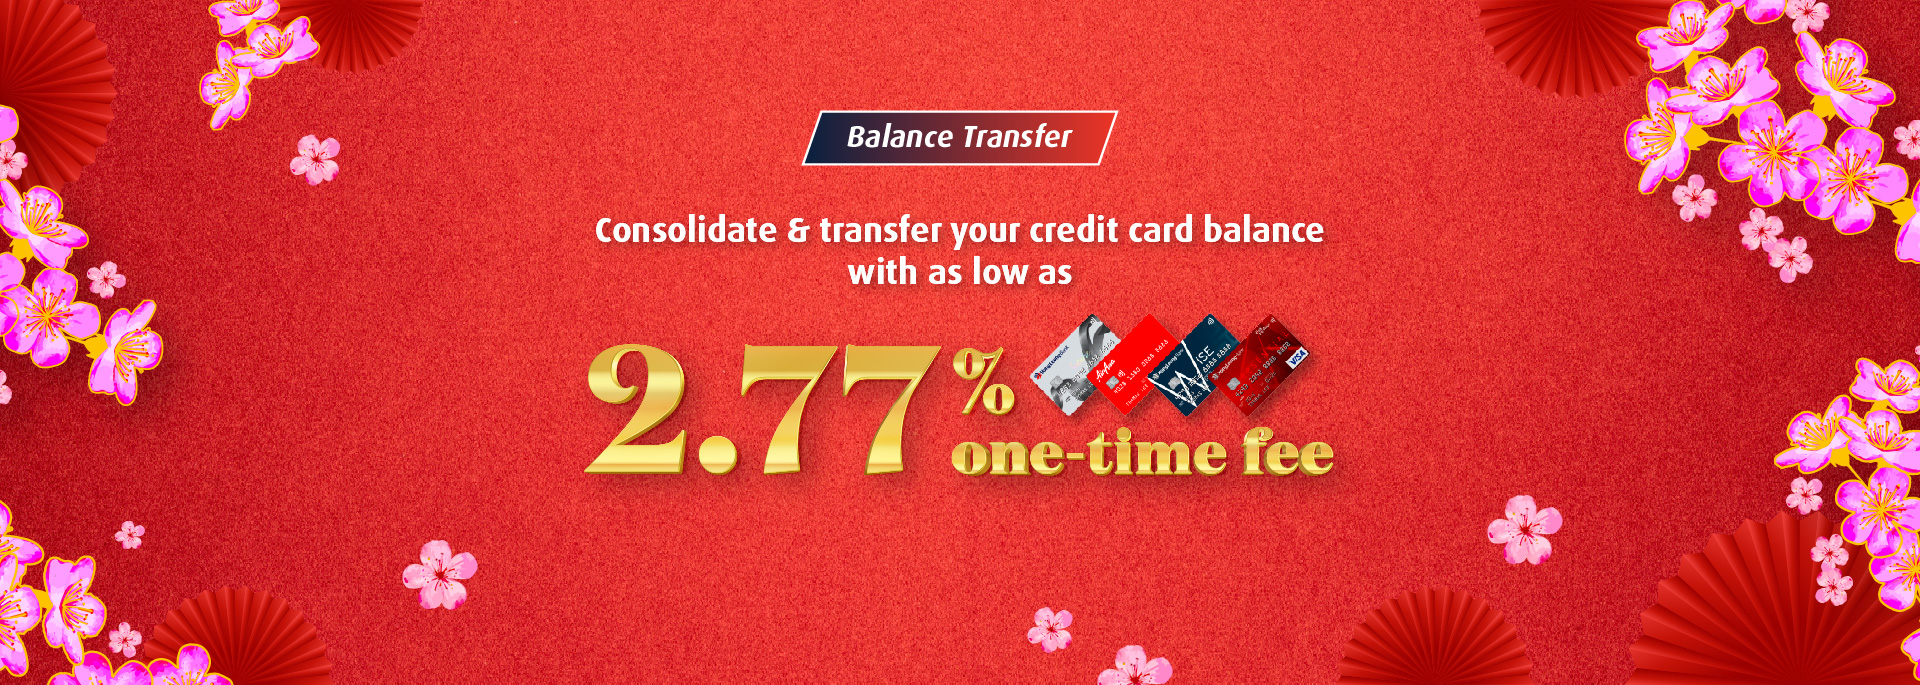 Apply for HLB Balance Transfer today and enjoy this exclusive CNY offer